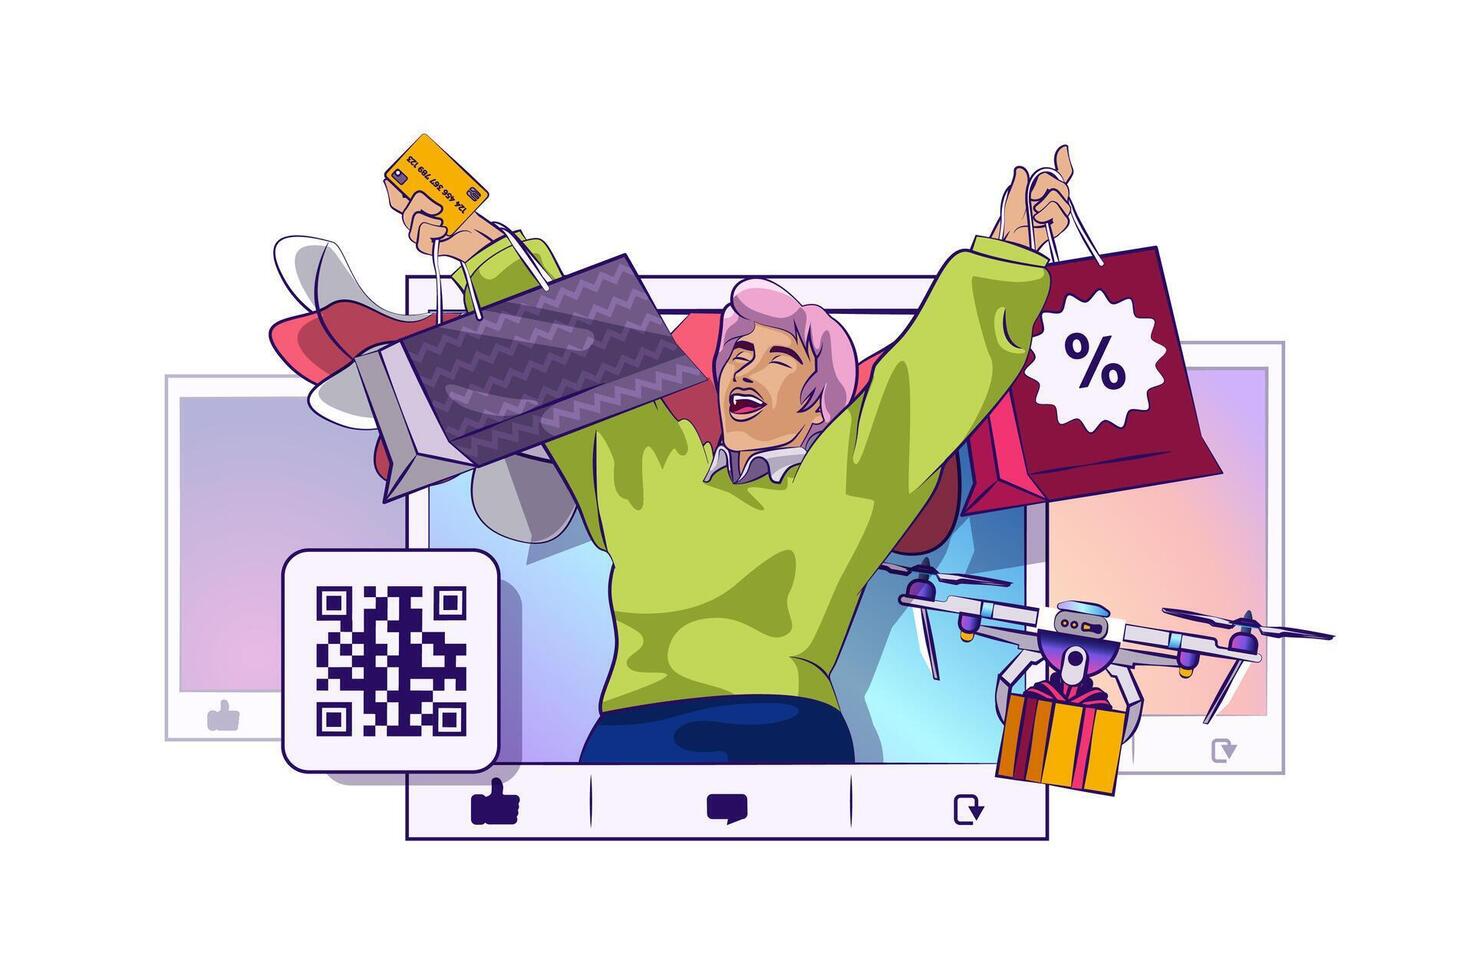 Online shop concept with people scene in flat cartoon design for web. Happy woman with bags making bargain purchases in internet store. Vector illustration for social media banner, marketing material.